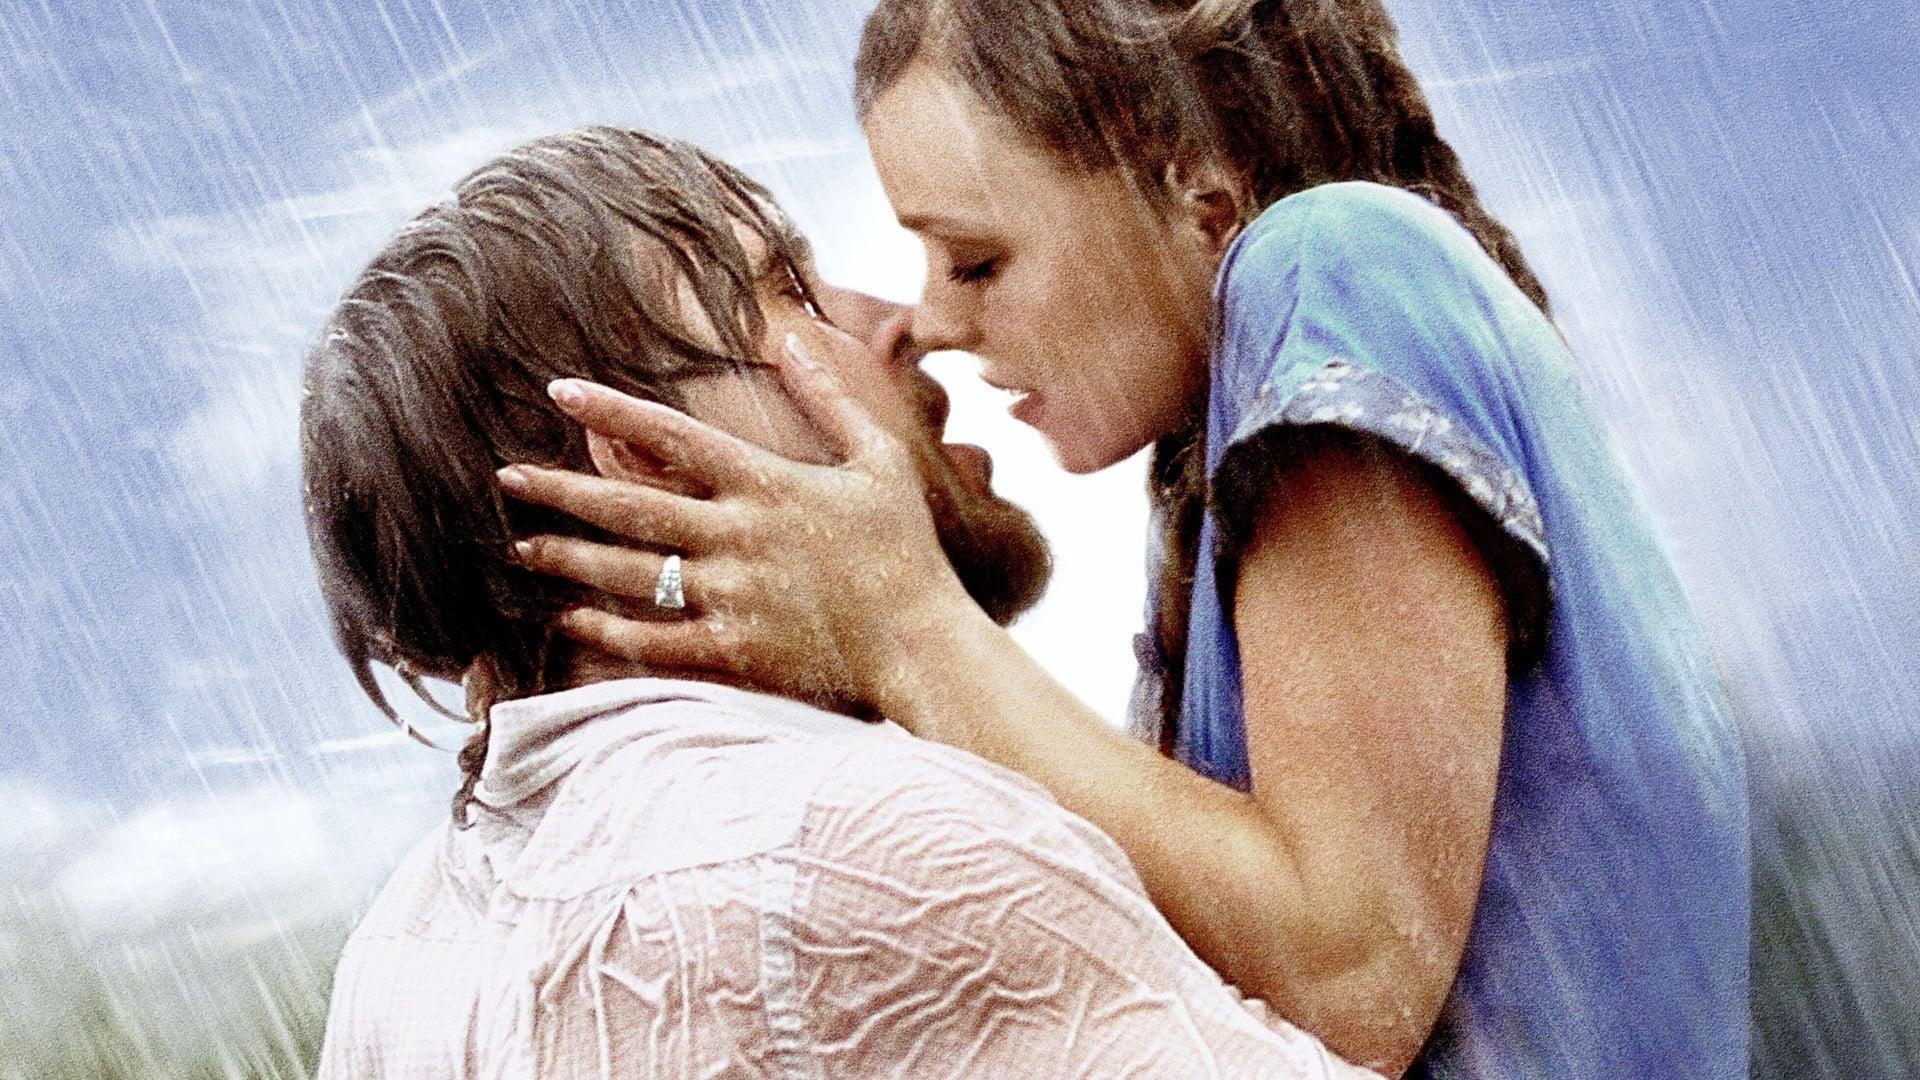 The Notebook backdrop